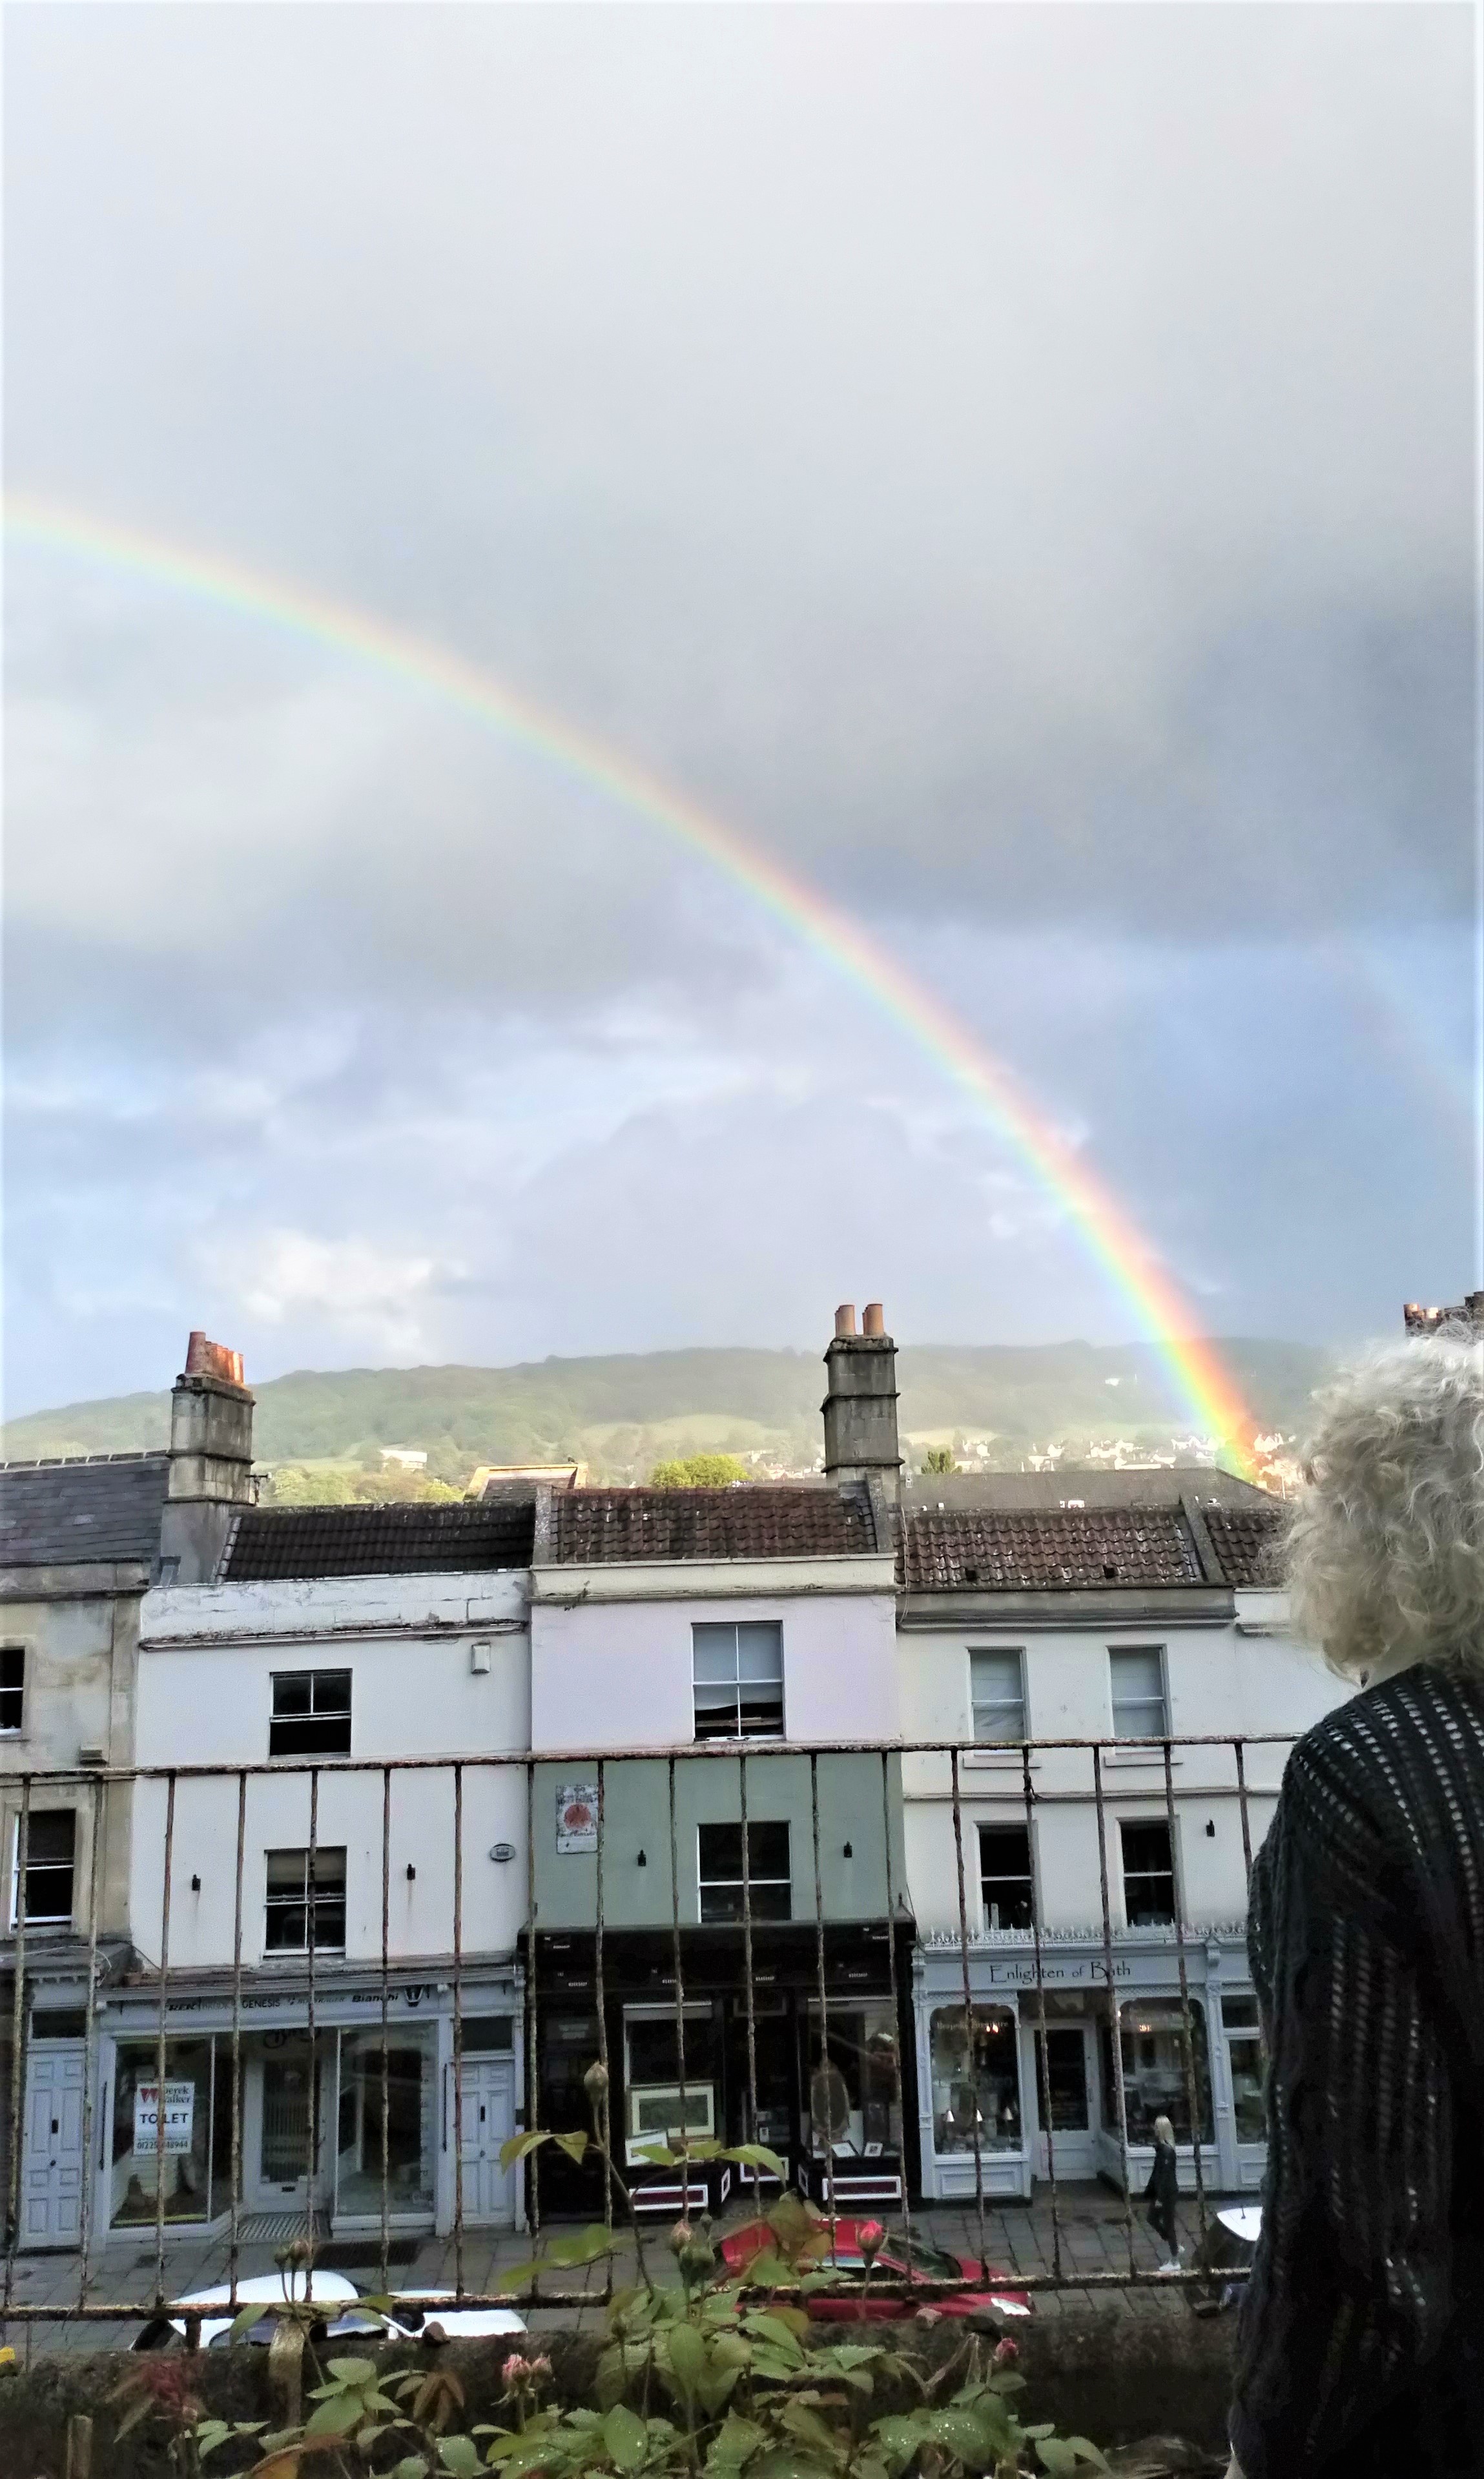 Looking for that pot of gold...  22 September 2019